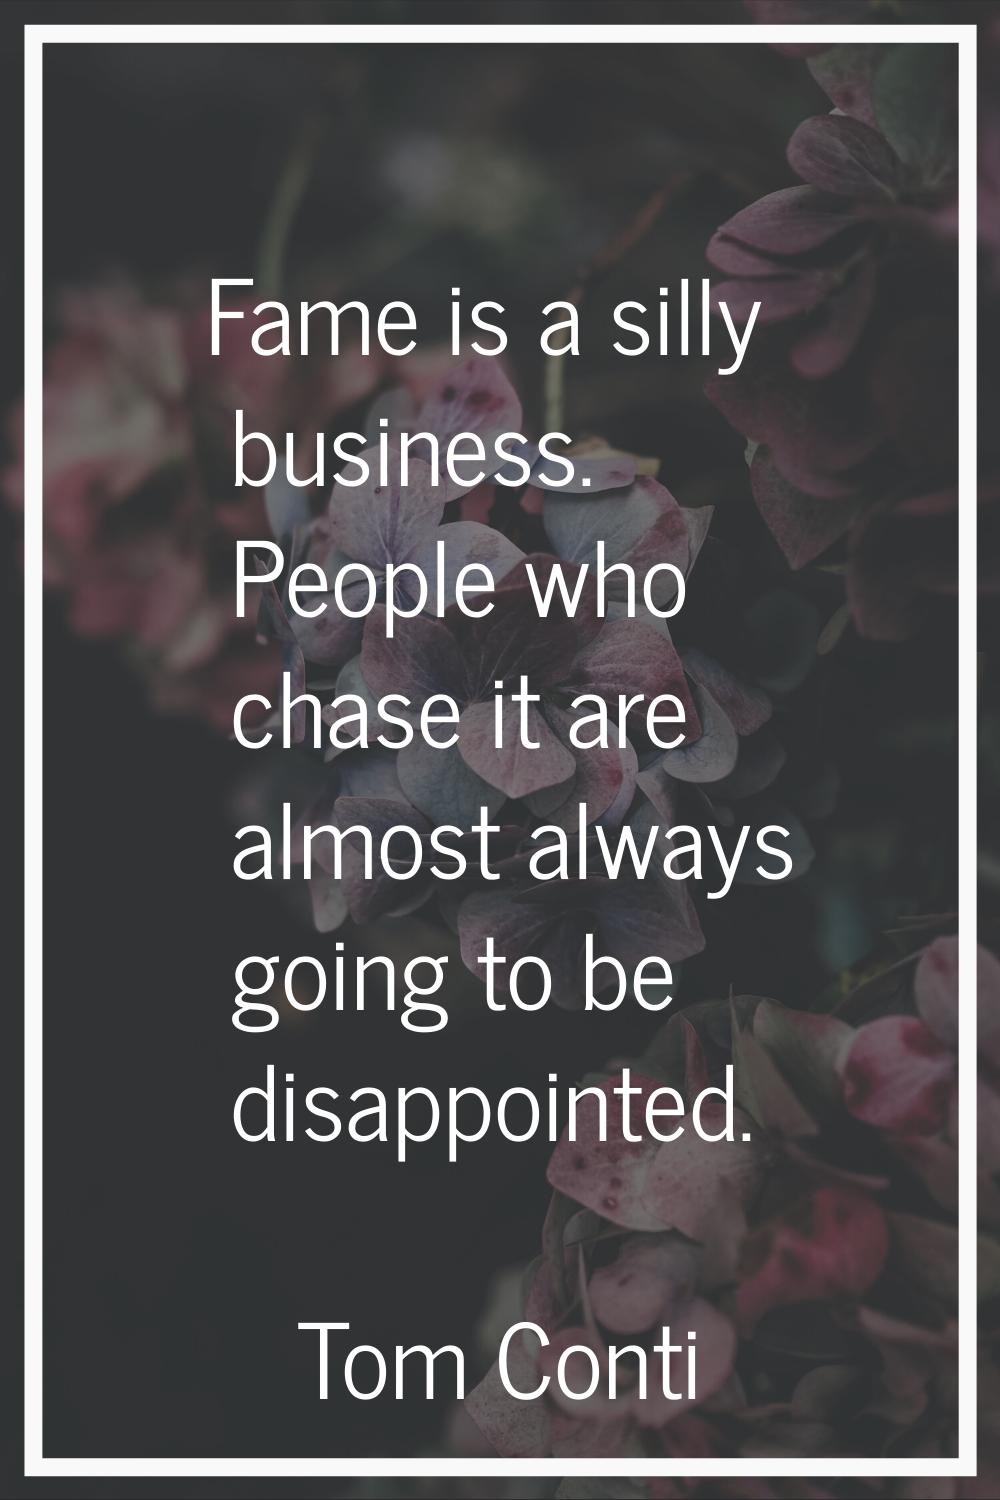 Fame is a silly business. People who chase it are almost always going to be disappointed.